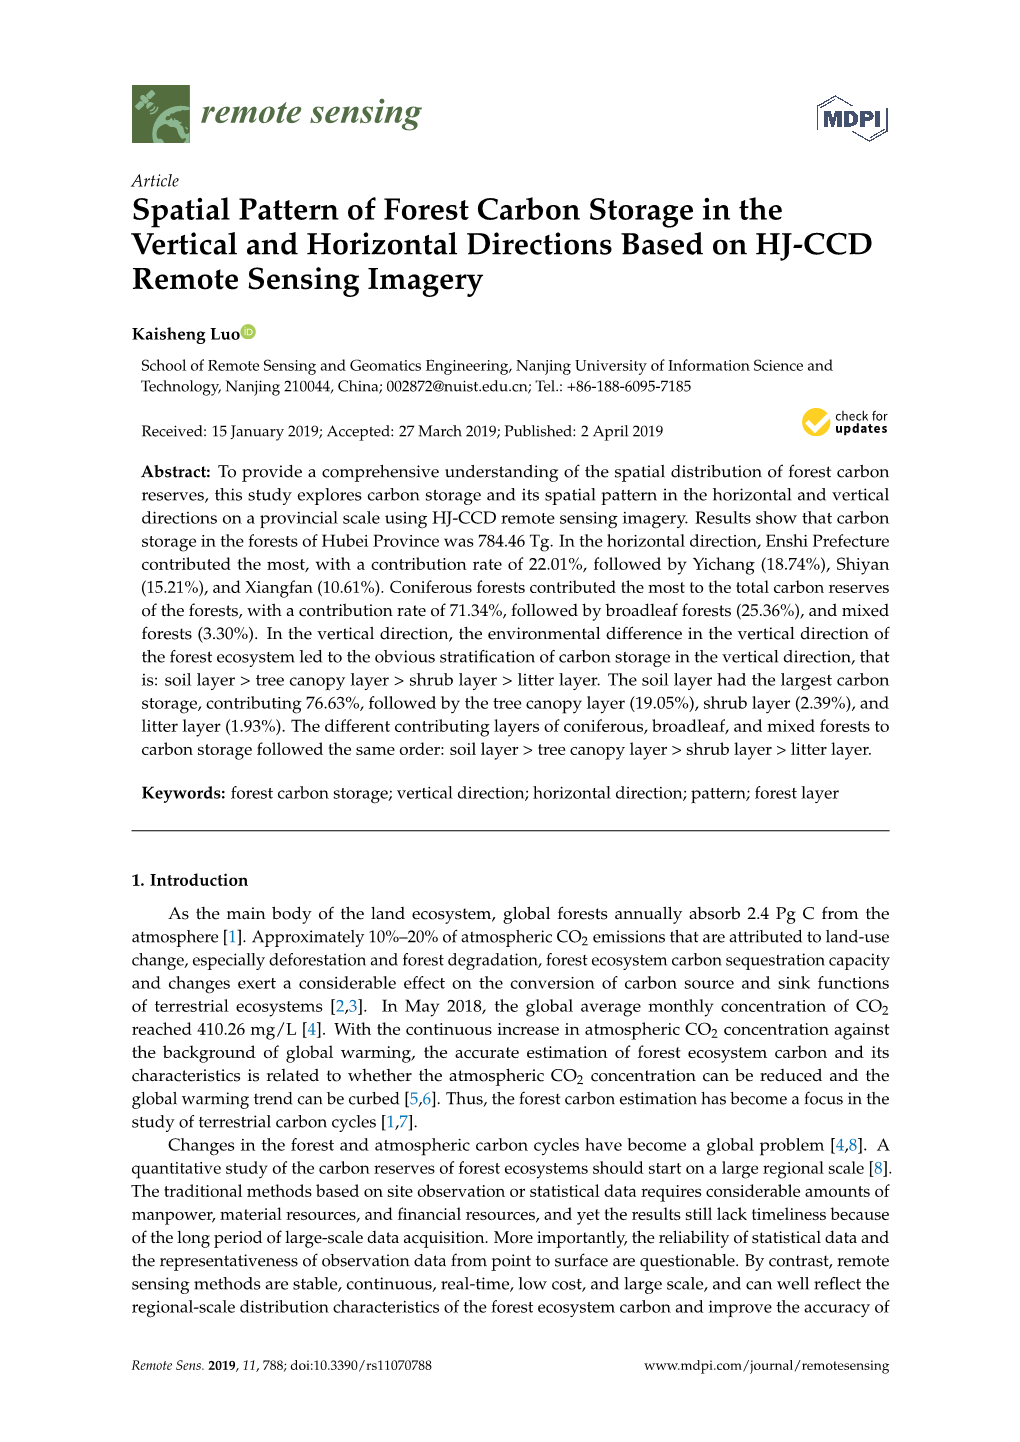 Spatial Pattern of Forest Carbon Storage in the Vertical and Horizontal Directions Based on HJ-CCD Remote Sensing Imagery